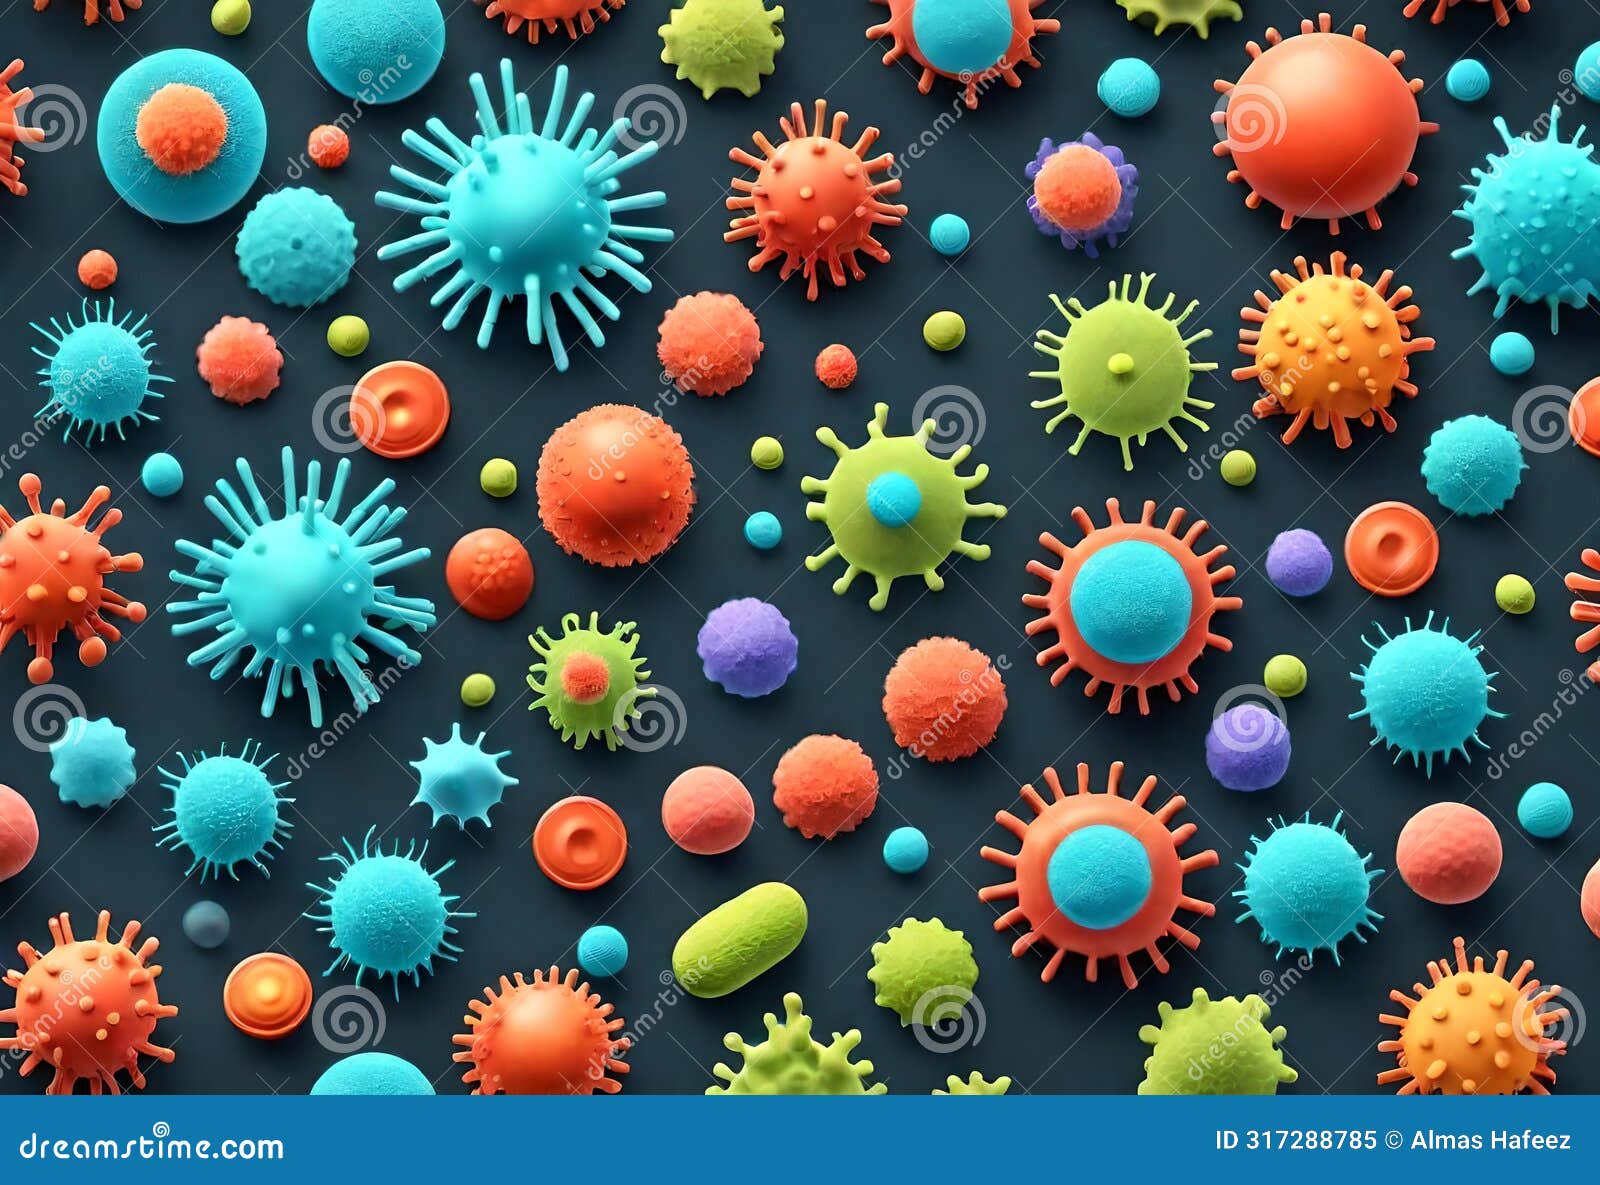 corona virus microorganisms in abstract biological background